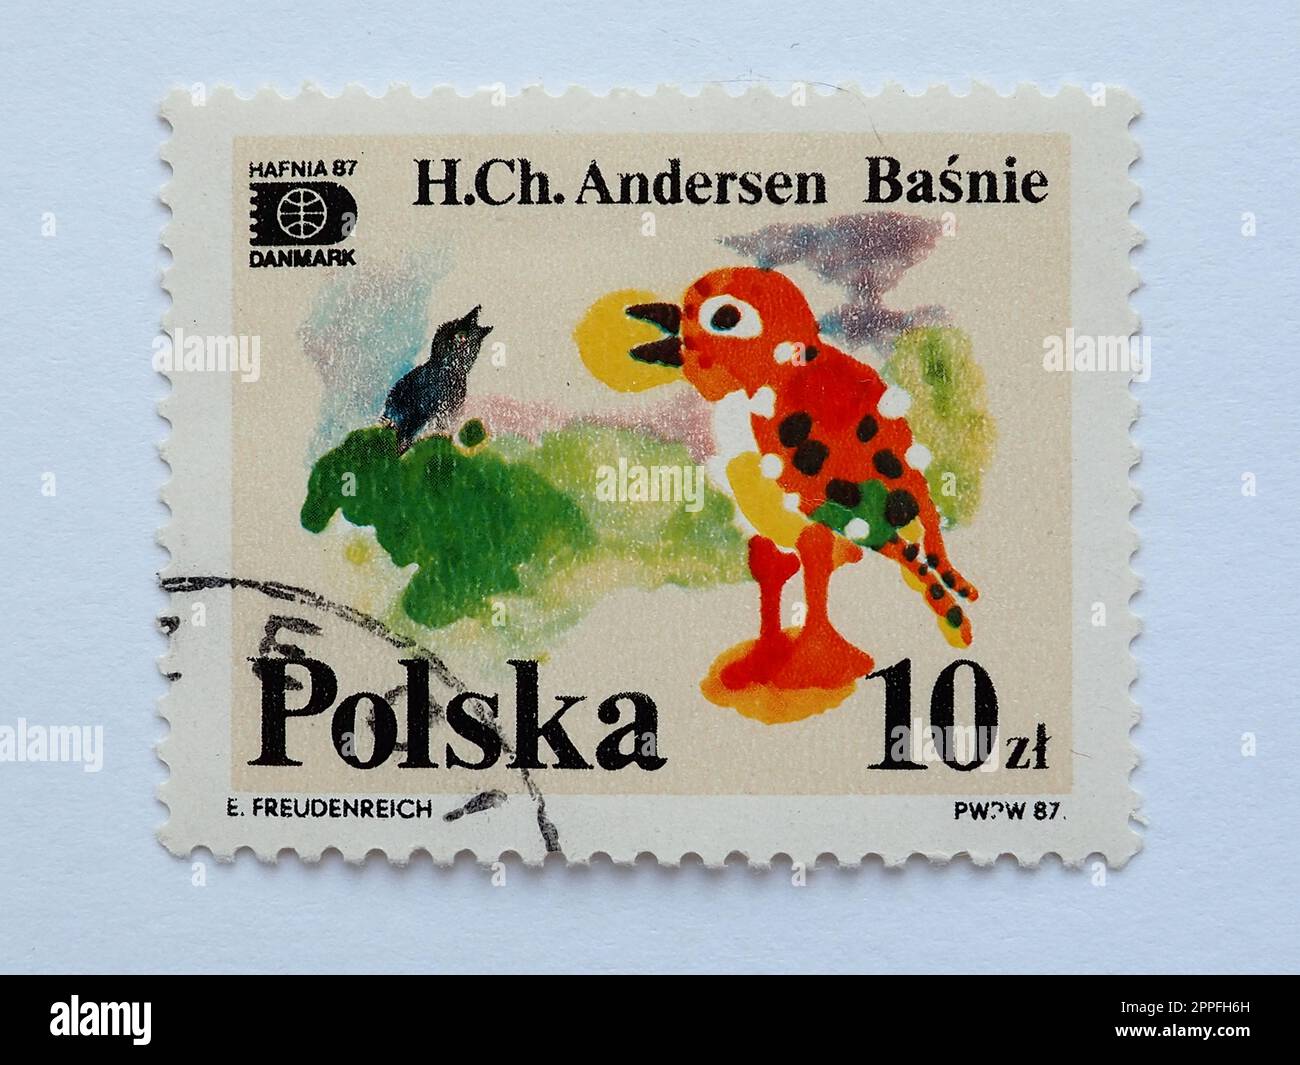 Petrozavodsk, Russia, July 26, 2021 Postage stamp Hans Christian Andersen Tales and fables 10 PLN with postmark E.Freudenreich PWPW 87 HAFNIA 87 Denmark Poland. Nightingale bird folk song Stock Photo